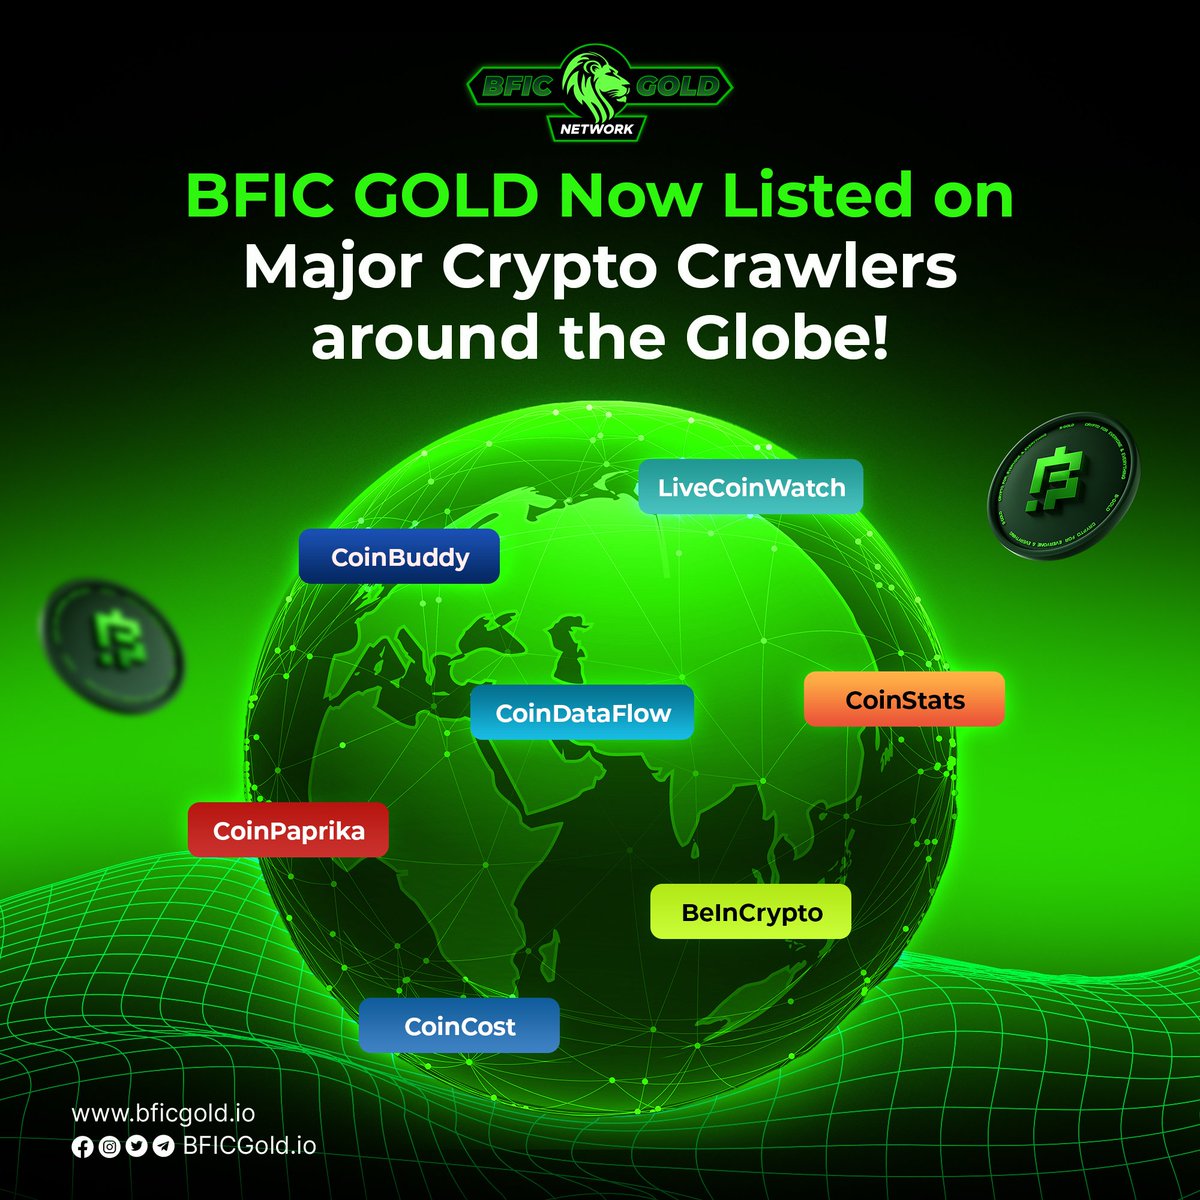 🌐 Exciting News! 🚀 BFICGold is now listed on major crypto crawlers worldwide! 

Stay informed and keep up with the latest updates!

📱 Download The BFICGold Network Now! 

#BFICGoldApp #BFICGold #innovationClub  #BFICGoldNetwork #BFIC #BGold #InnovationFactory #BFICoin